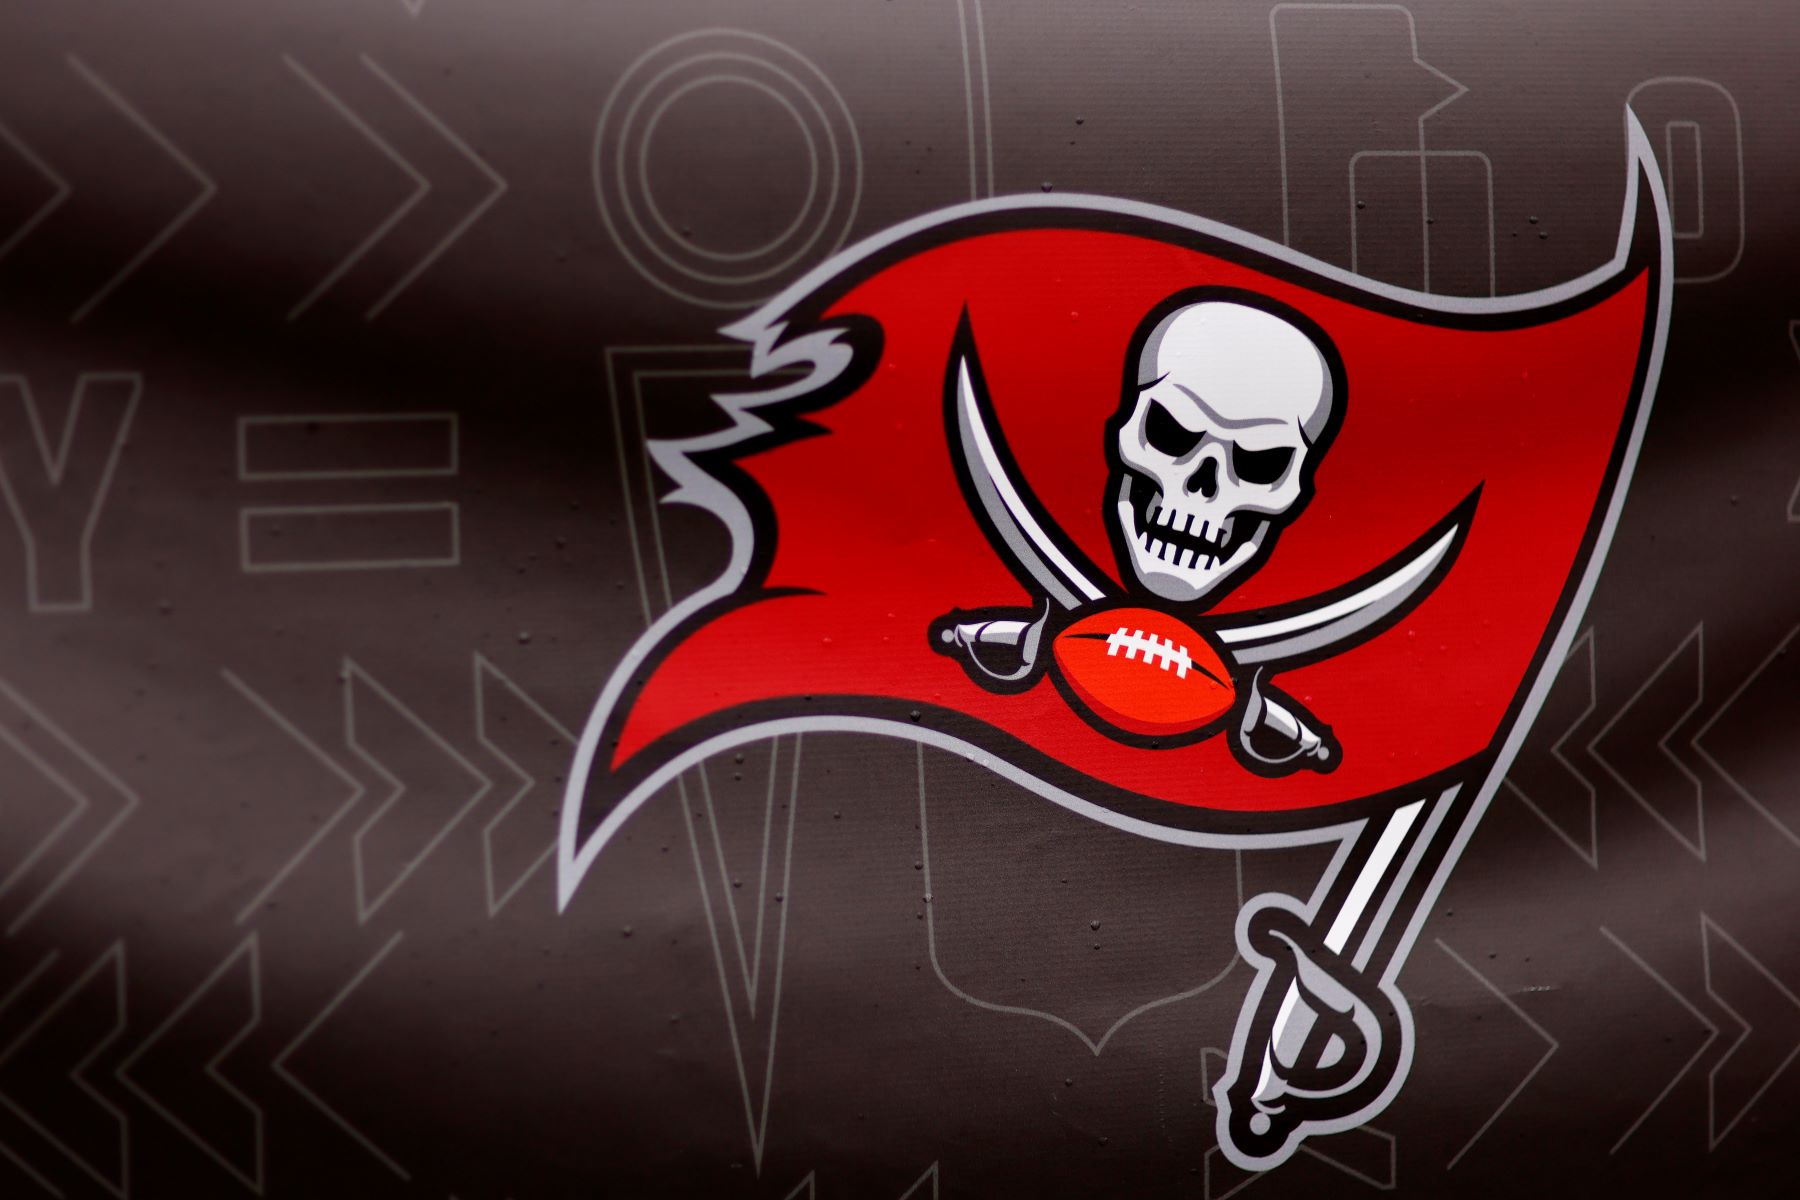 NFL team Tampa Bay Buccaneers logo graphic prior to the NFC Wild Card Playoff game